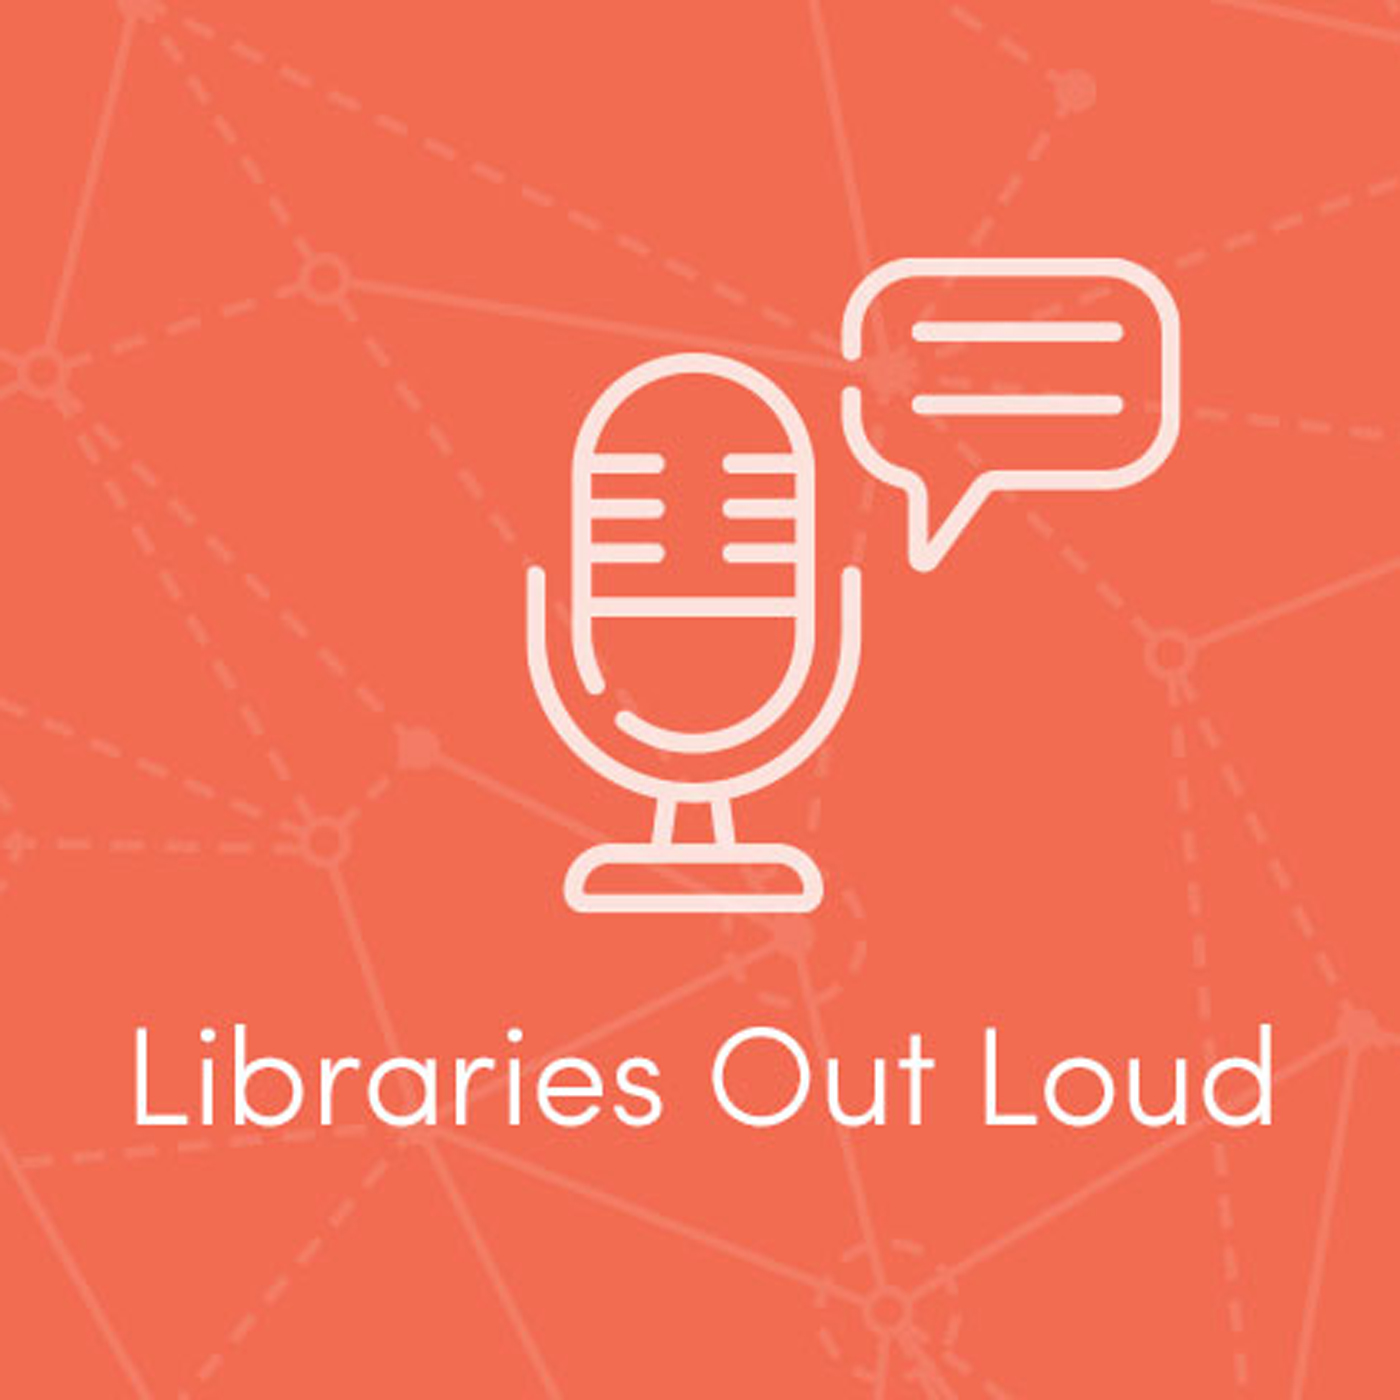 Libraries Out Loud